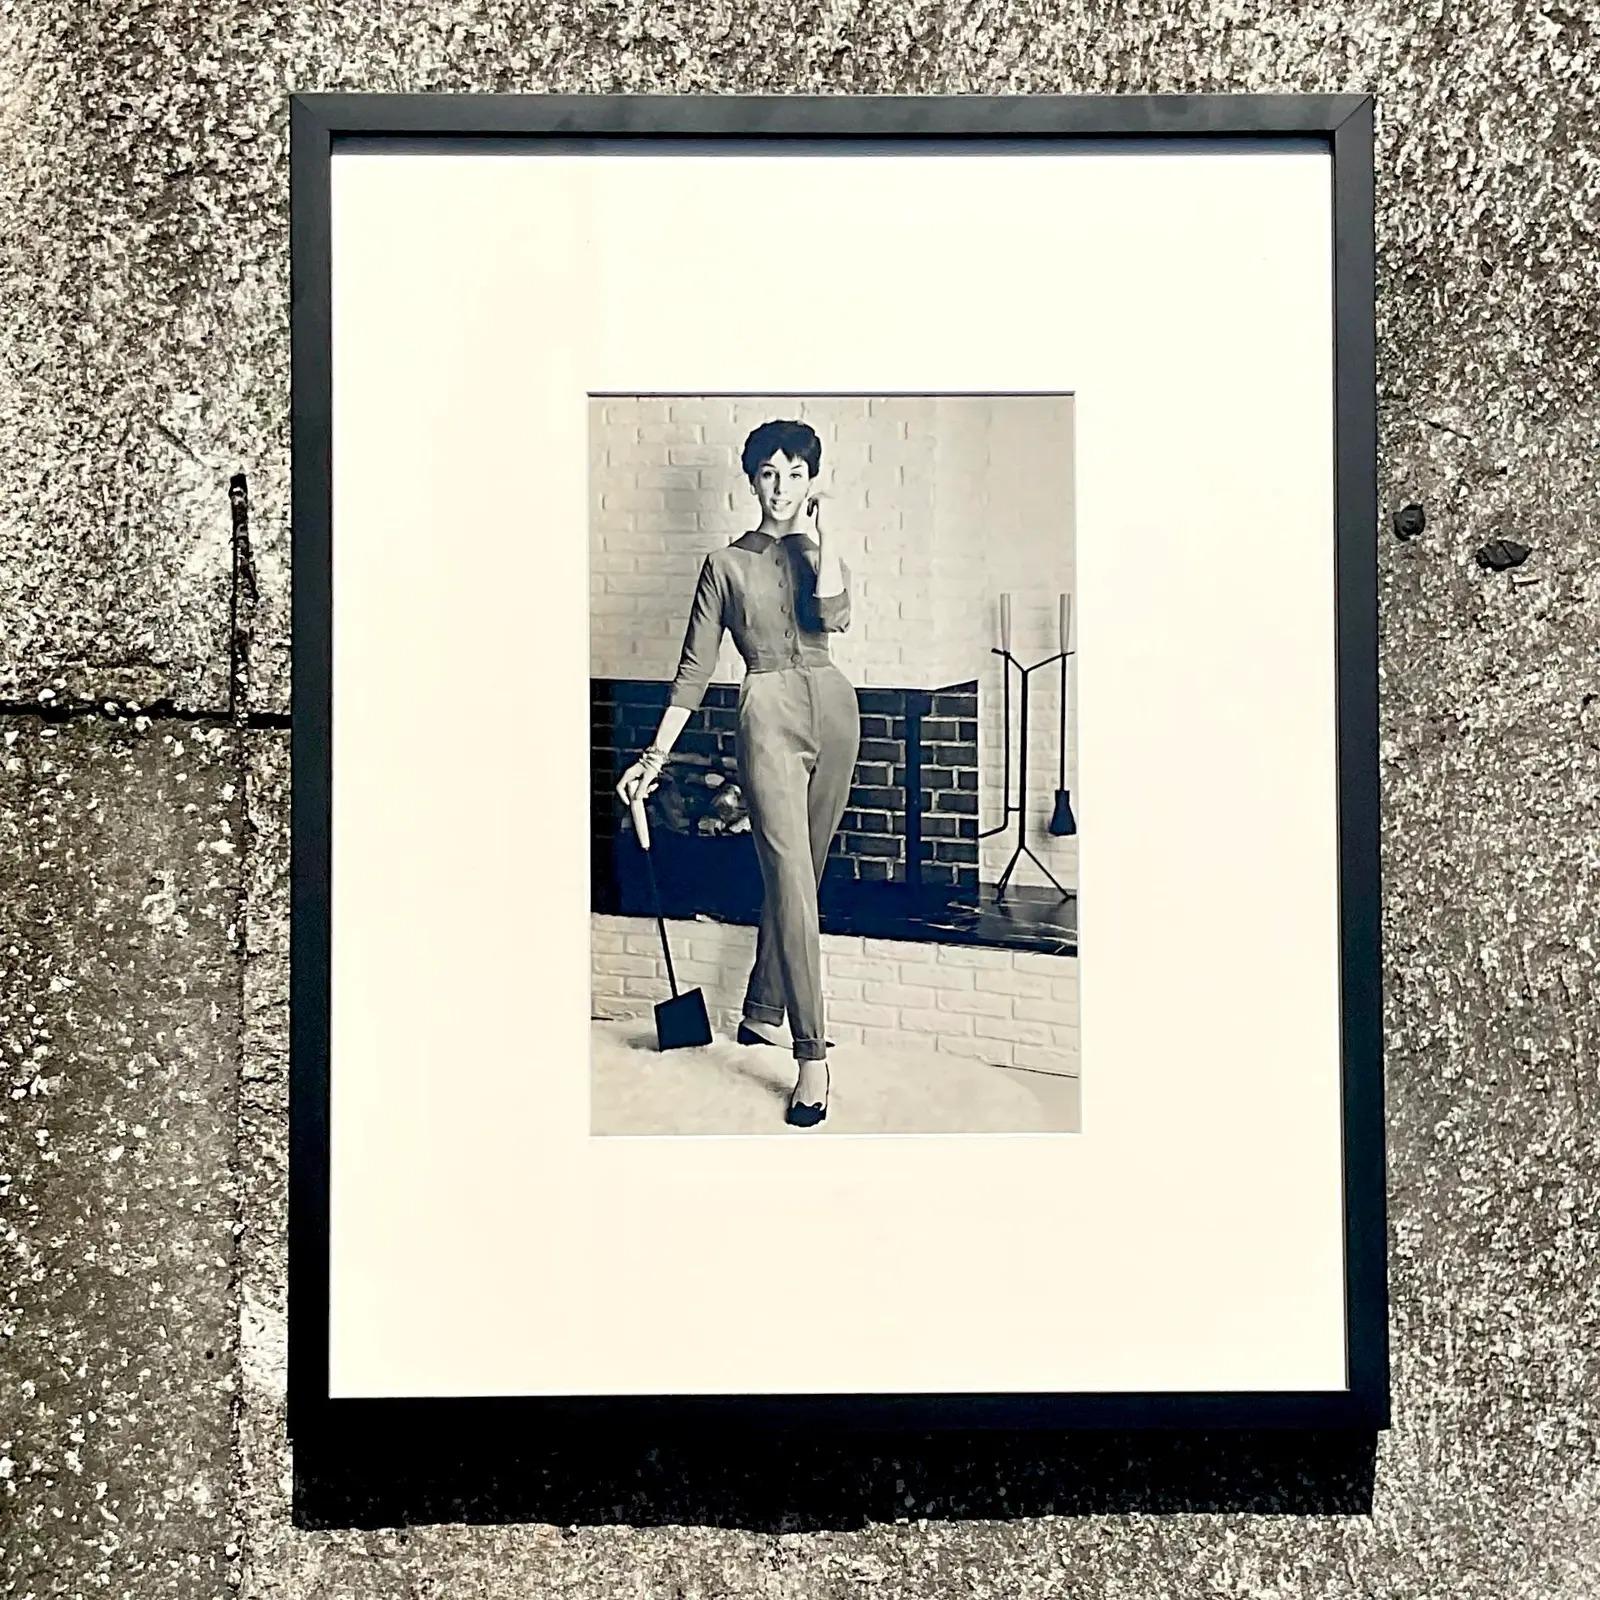 A fantastic vintage framed black and white photo. A chic 70s fashion shot of a girl with her chimney broom. Nothing says fashion like a good chimney broom. Newly framed in a chic and simple black frame. Acquired from a Palm Beach estate.